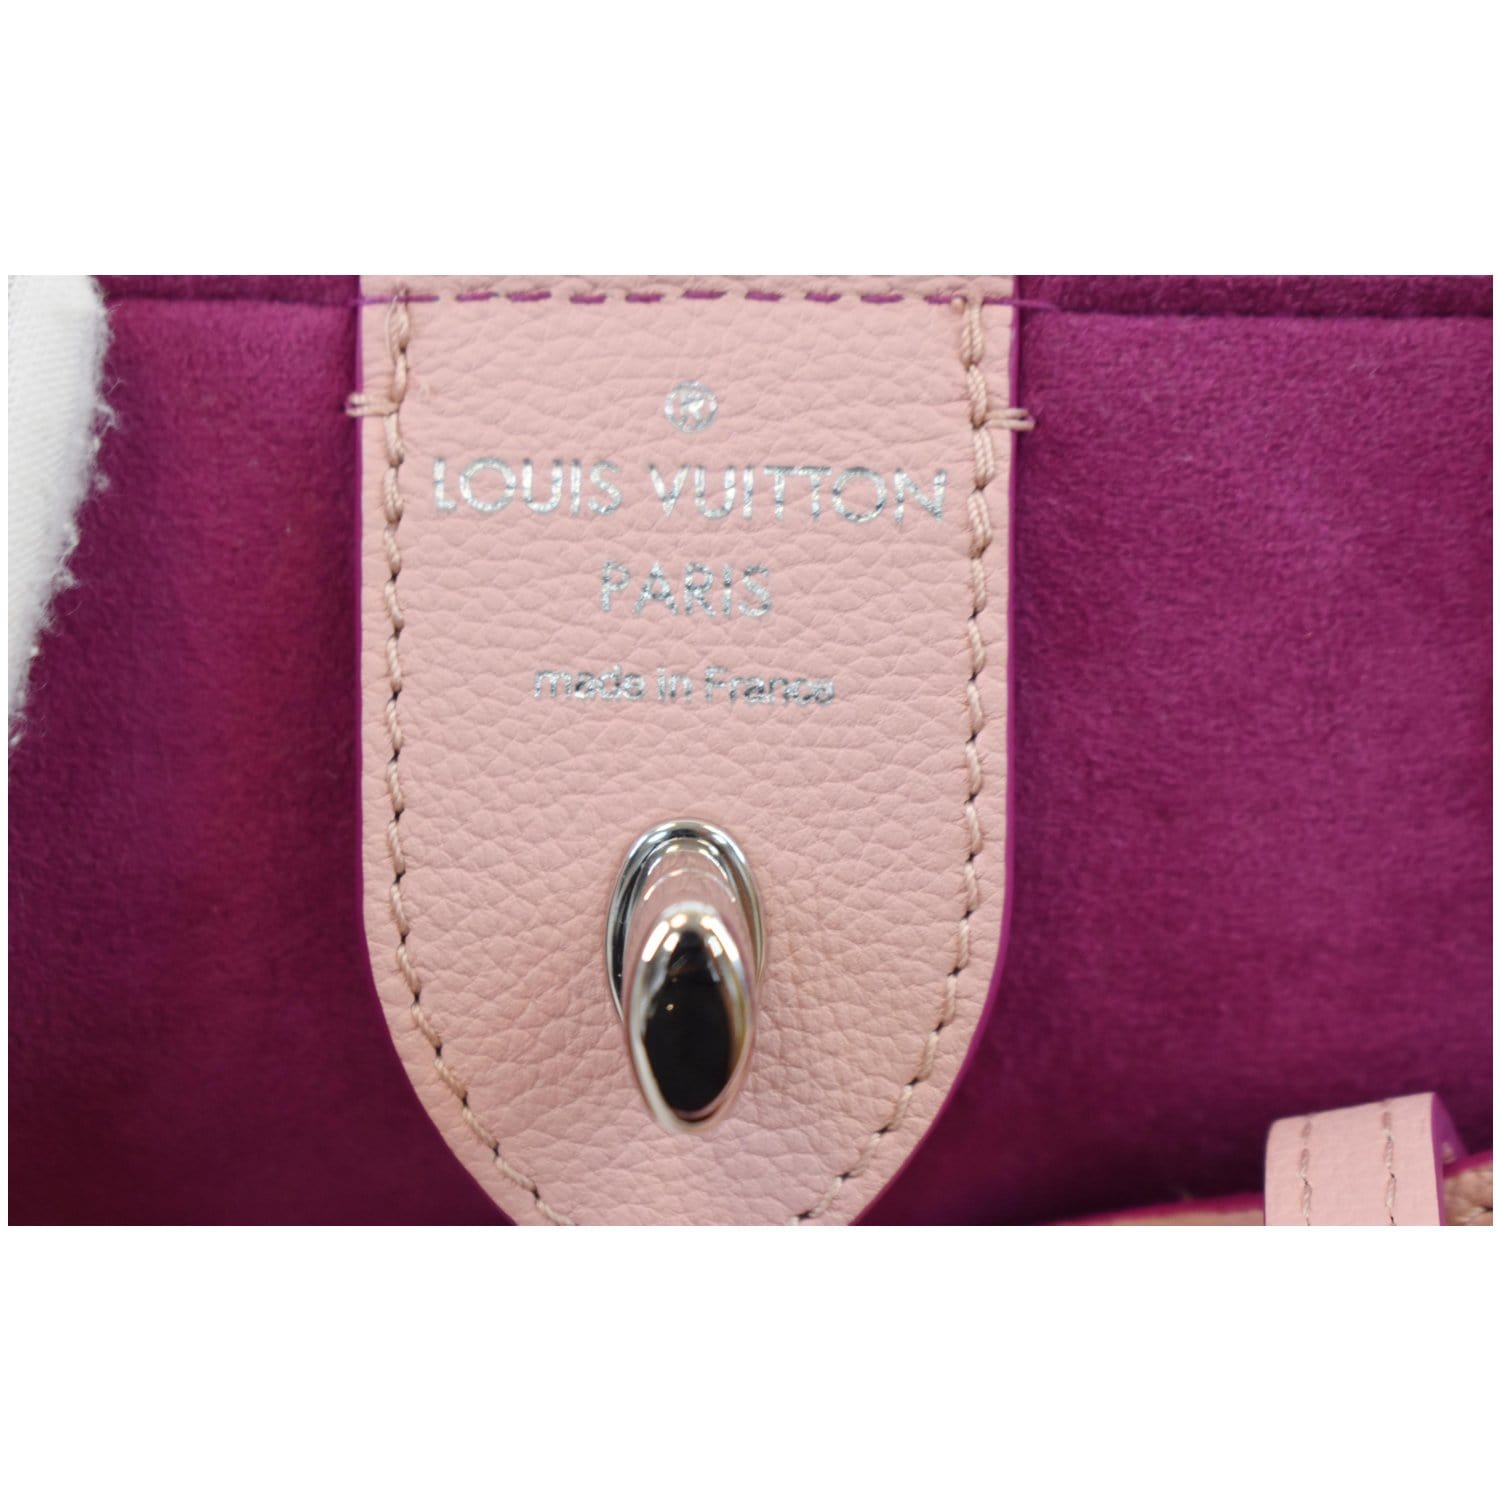 Lockme leather handbag Louis Vuitton Pink in Leather - 18883161